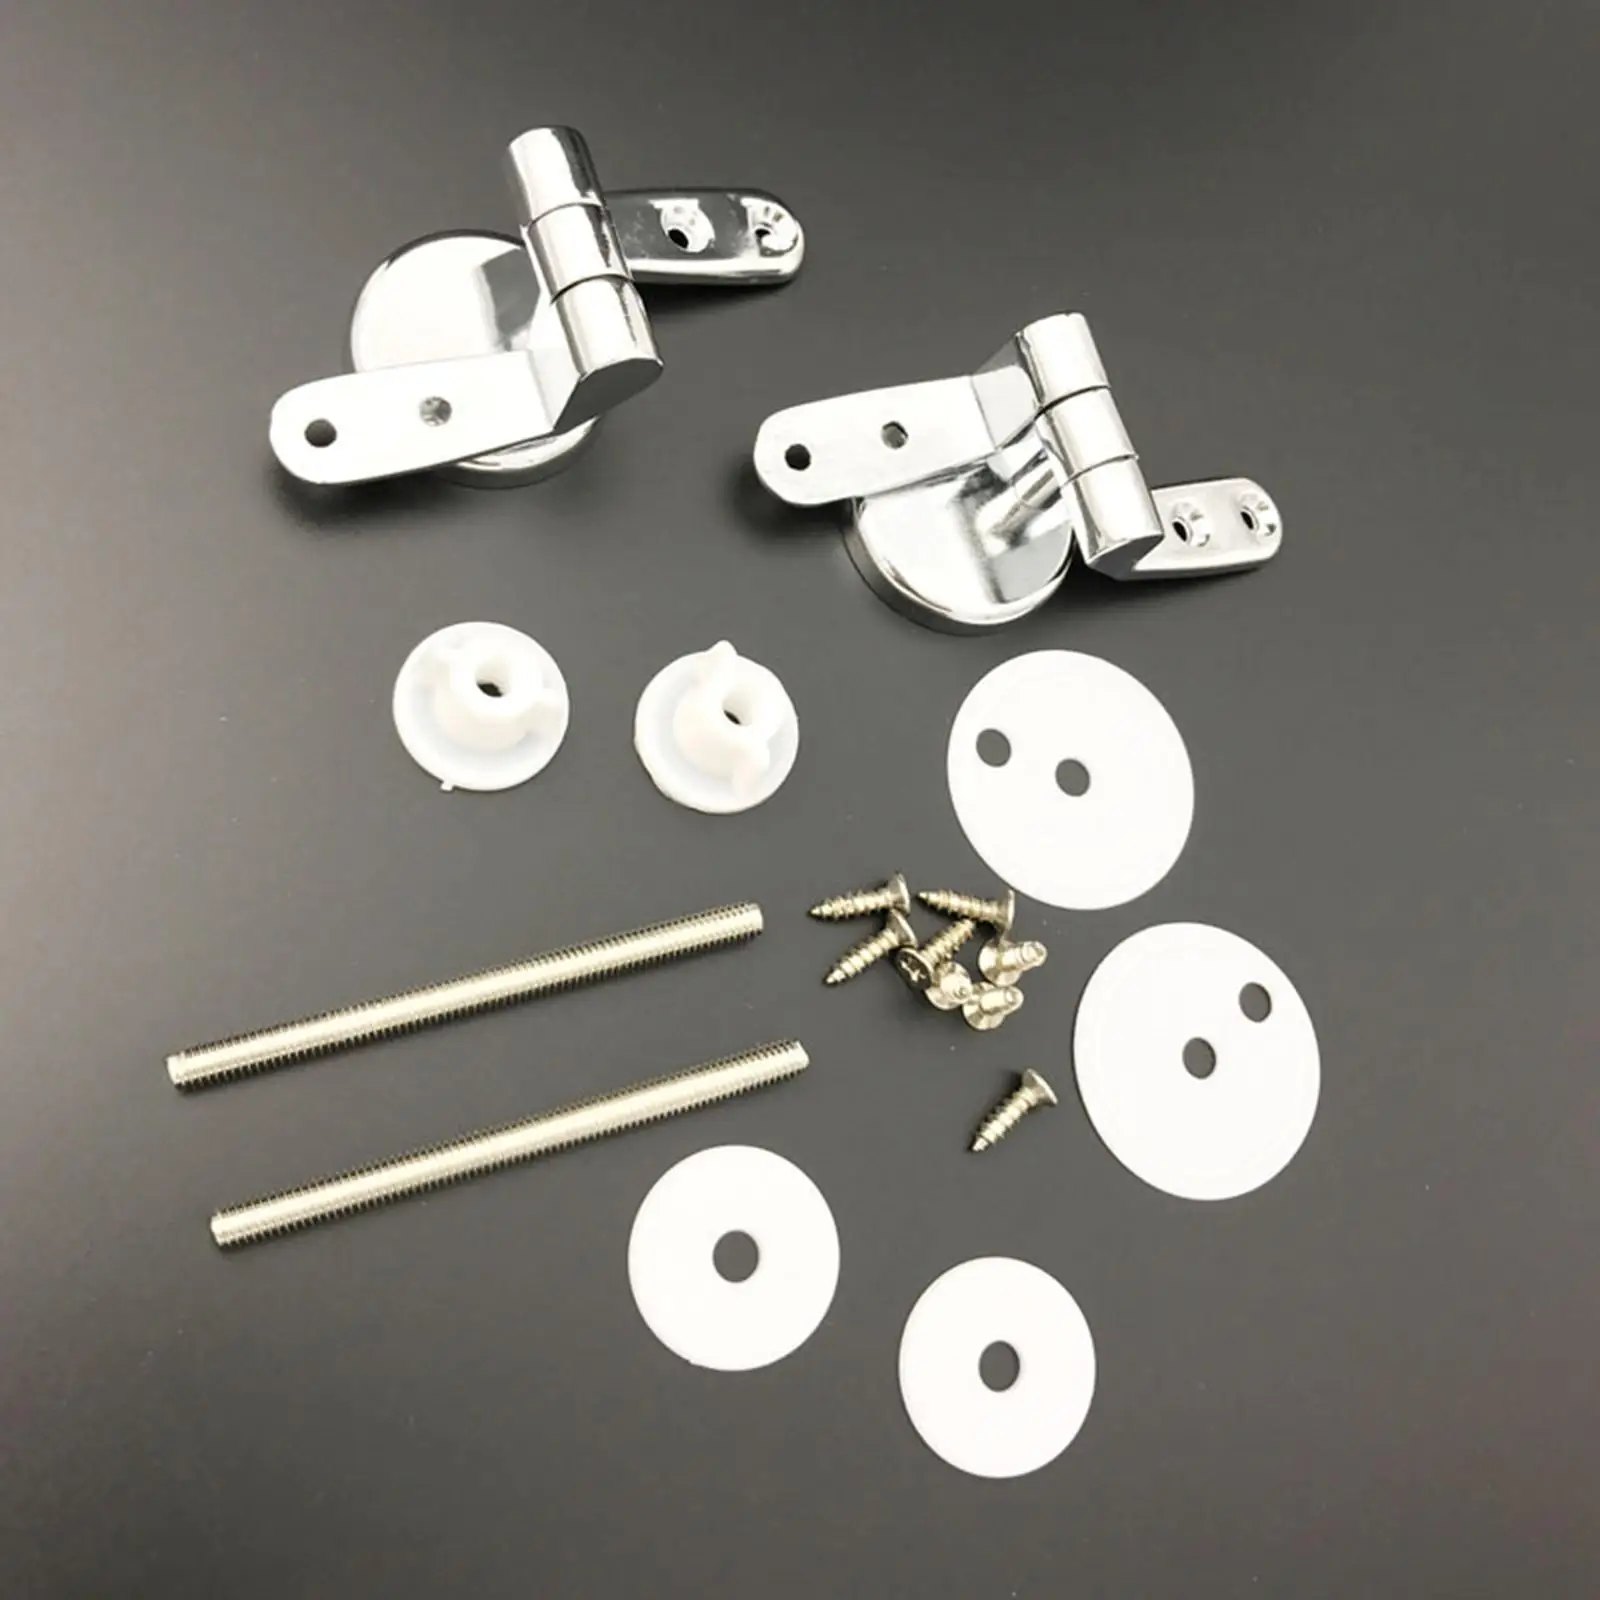 Universal Toilet Seats Hinges for Toilet Lid with Screws and Accessories Zinc Alloy Finished Simple to Install Toilet Repairing